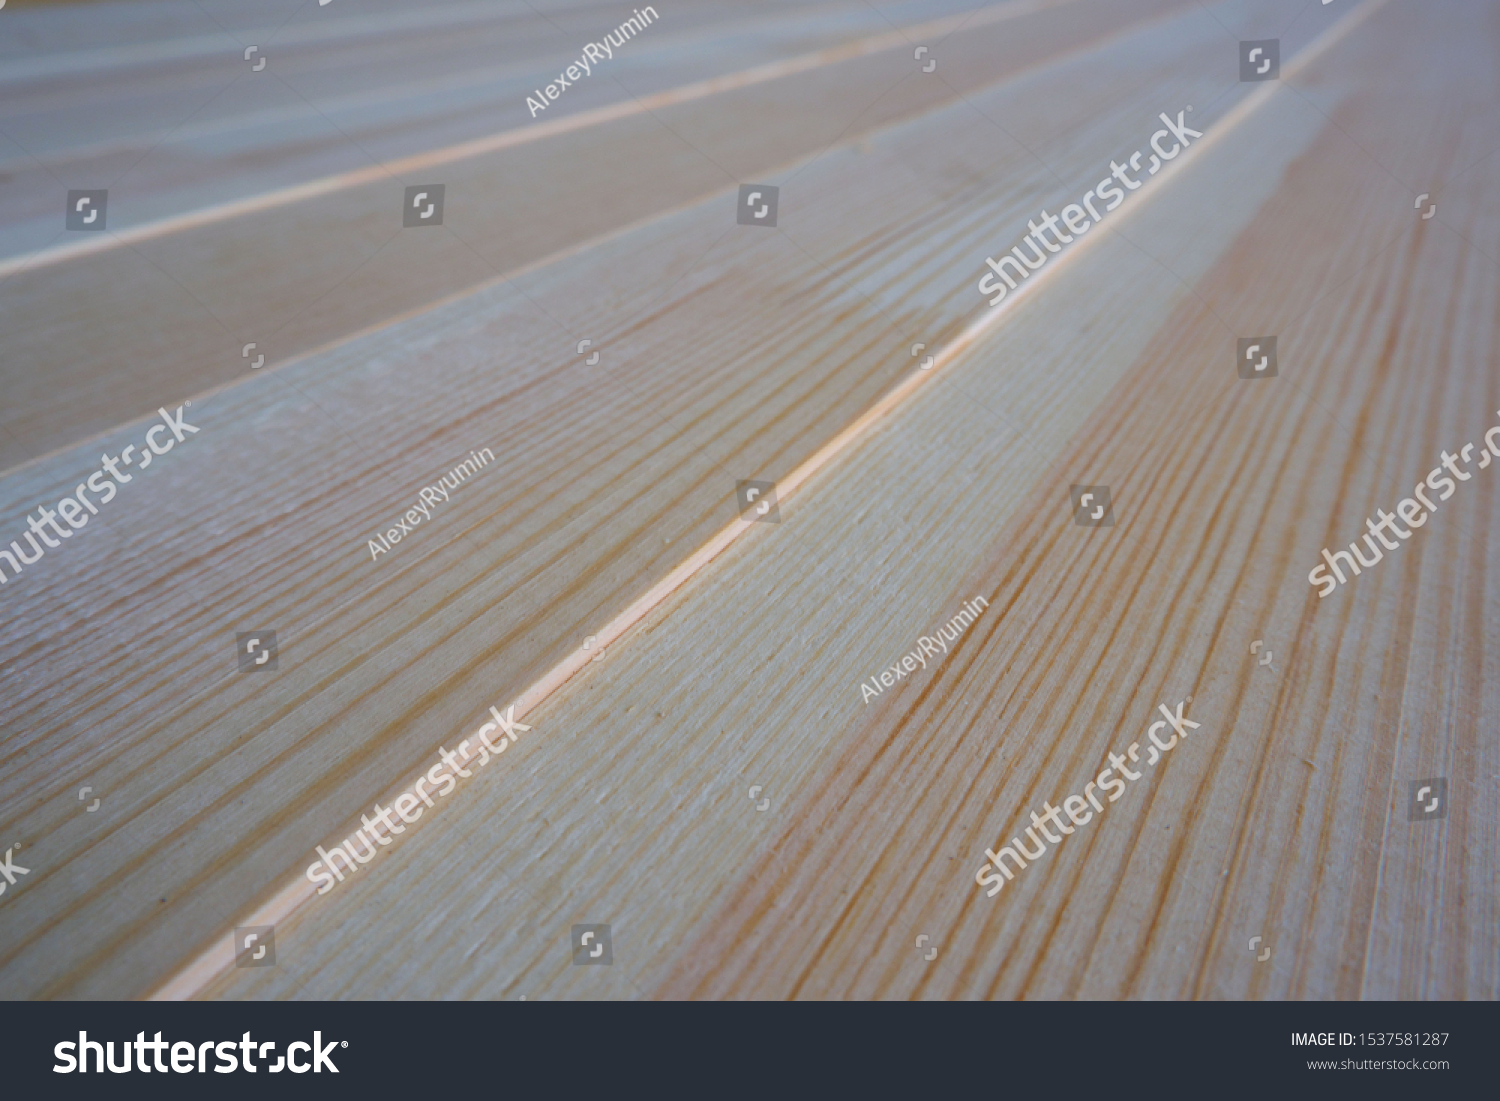 Top close up view of stack of three-layer wooden glued laminated timber beams from pine finger joint spliced boards for wooden windows, selective focus